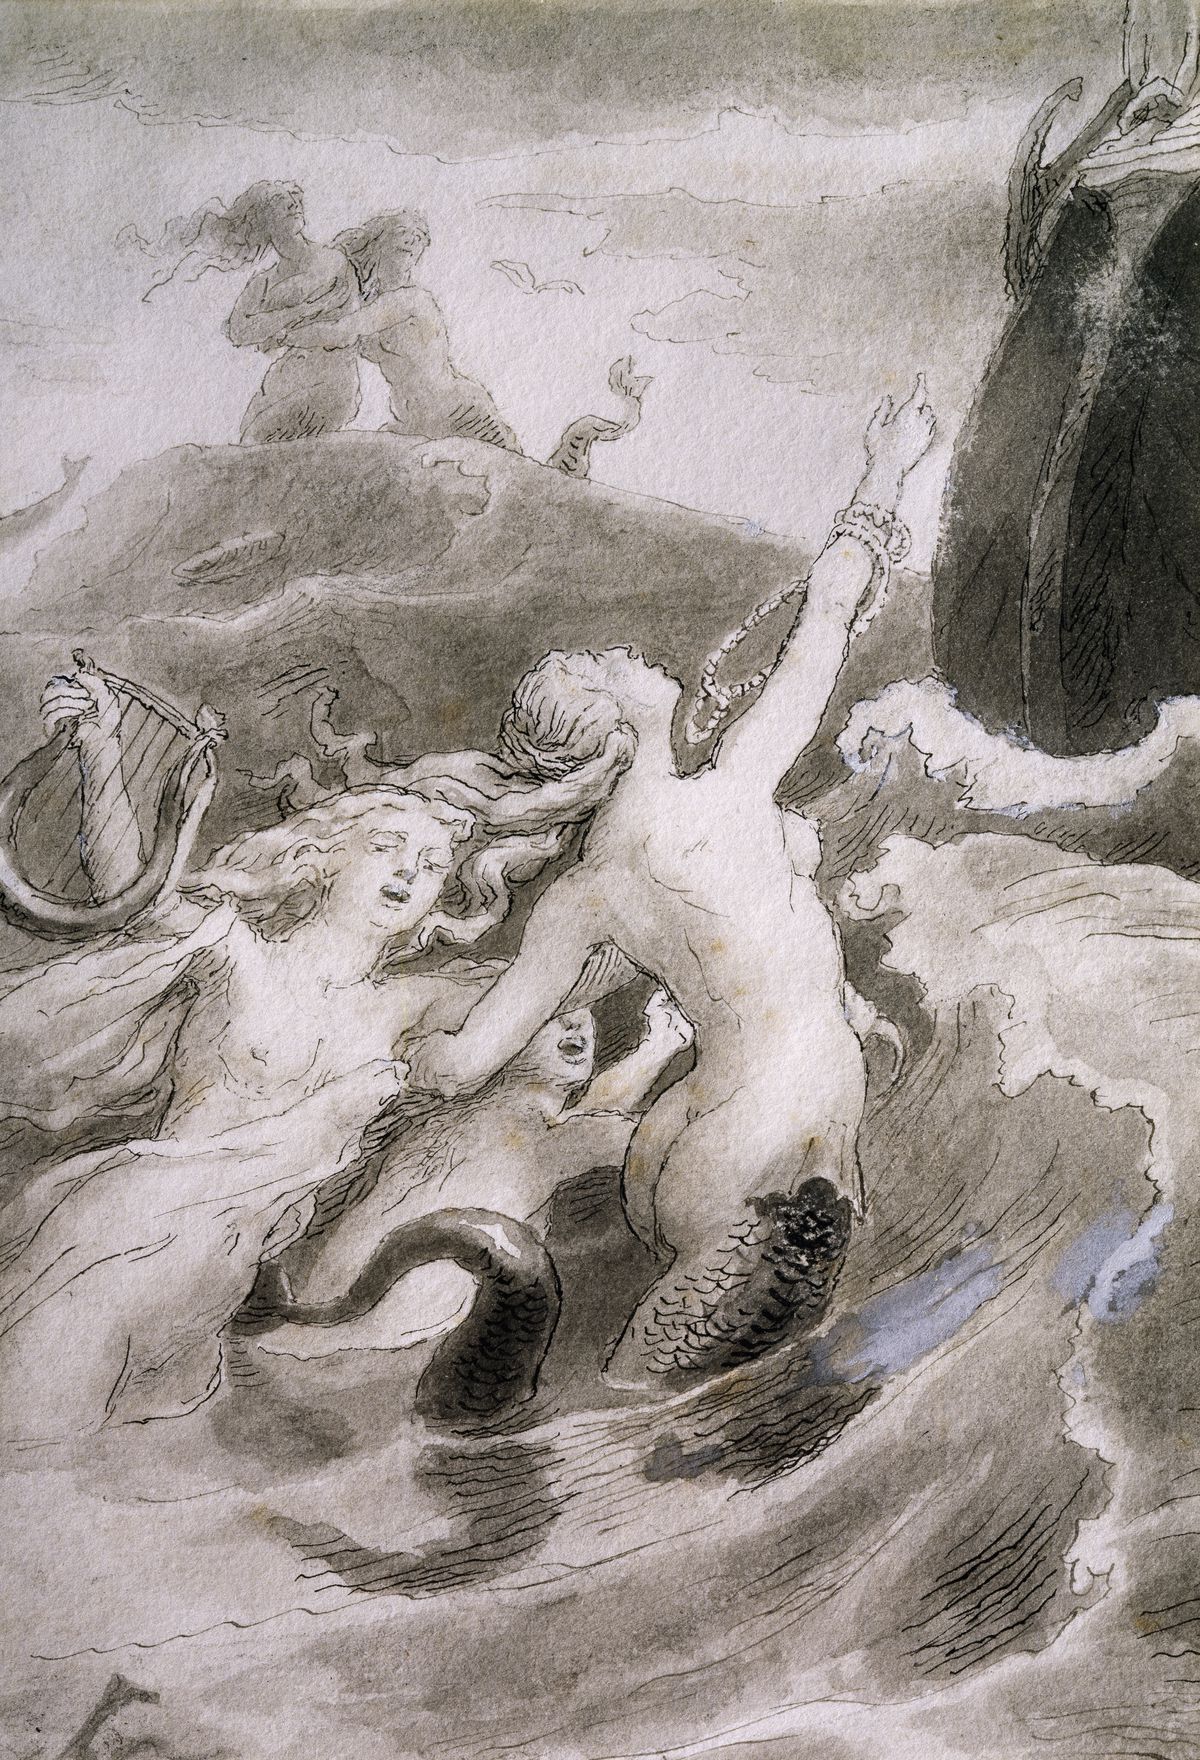 An 1800s ink and watercolor drawing of mermaids in rough seas, with two in the foreground clinging to a rock as a ship approaches, one singing and the other playing a lyre.